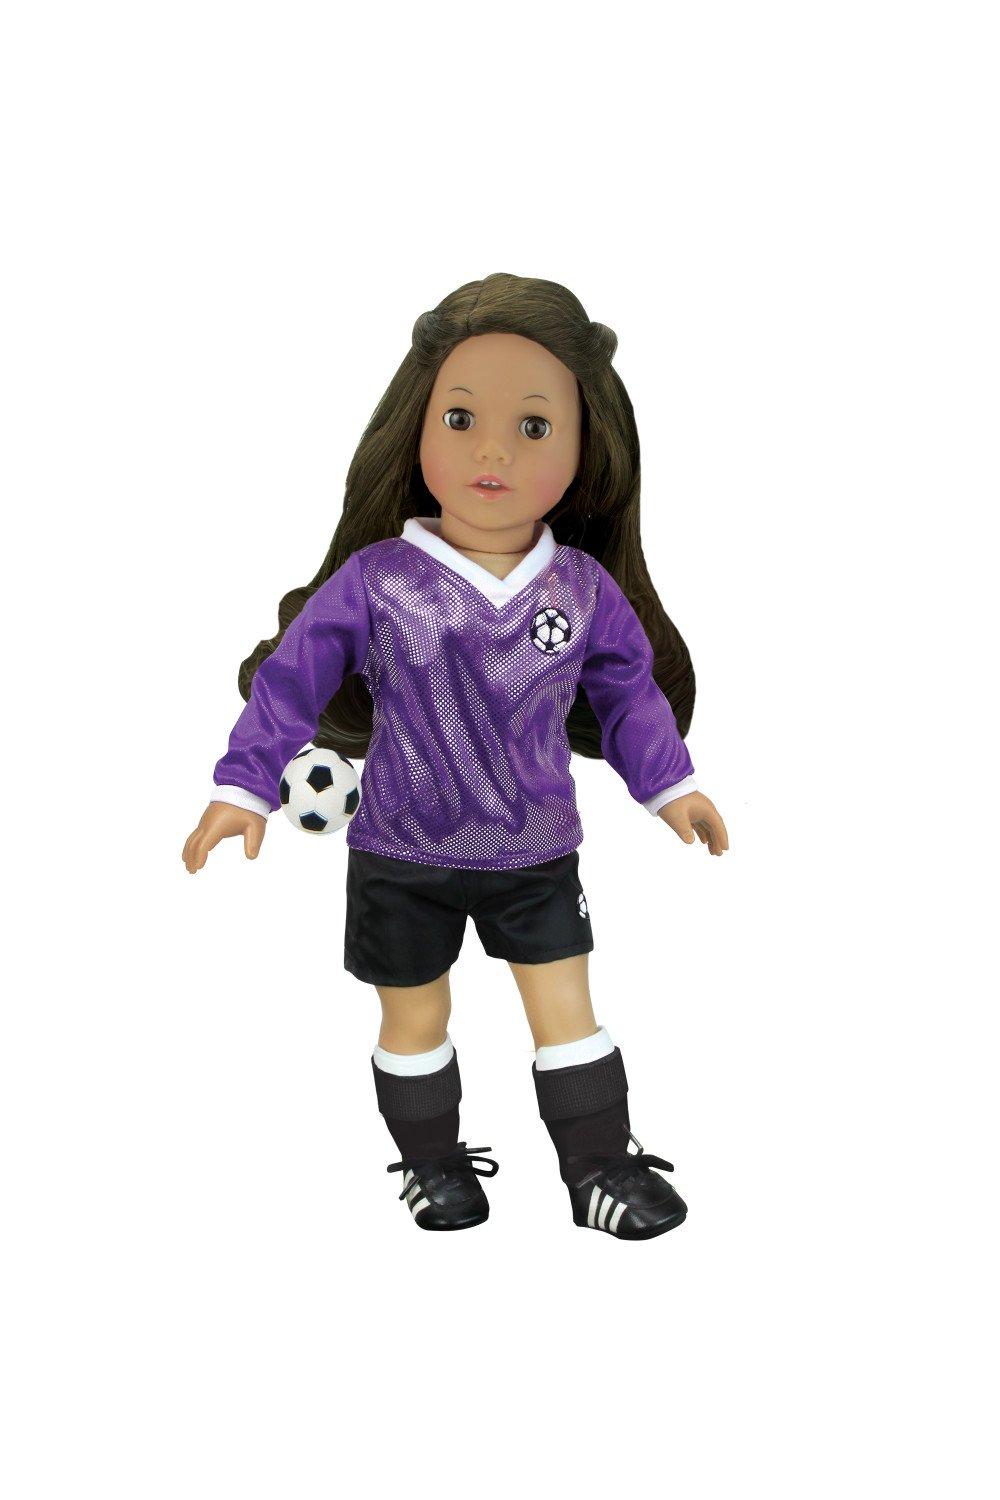 Sophia’s 18" Doll Footballer Outfit with Accessories & Doll Shoes Set